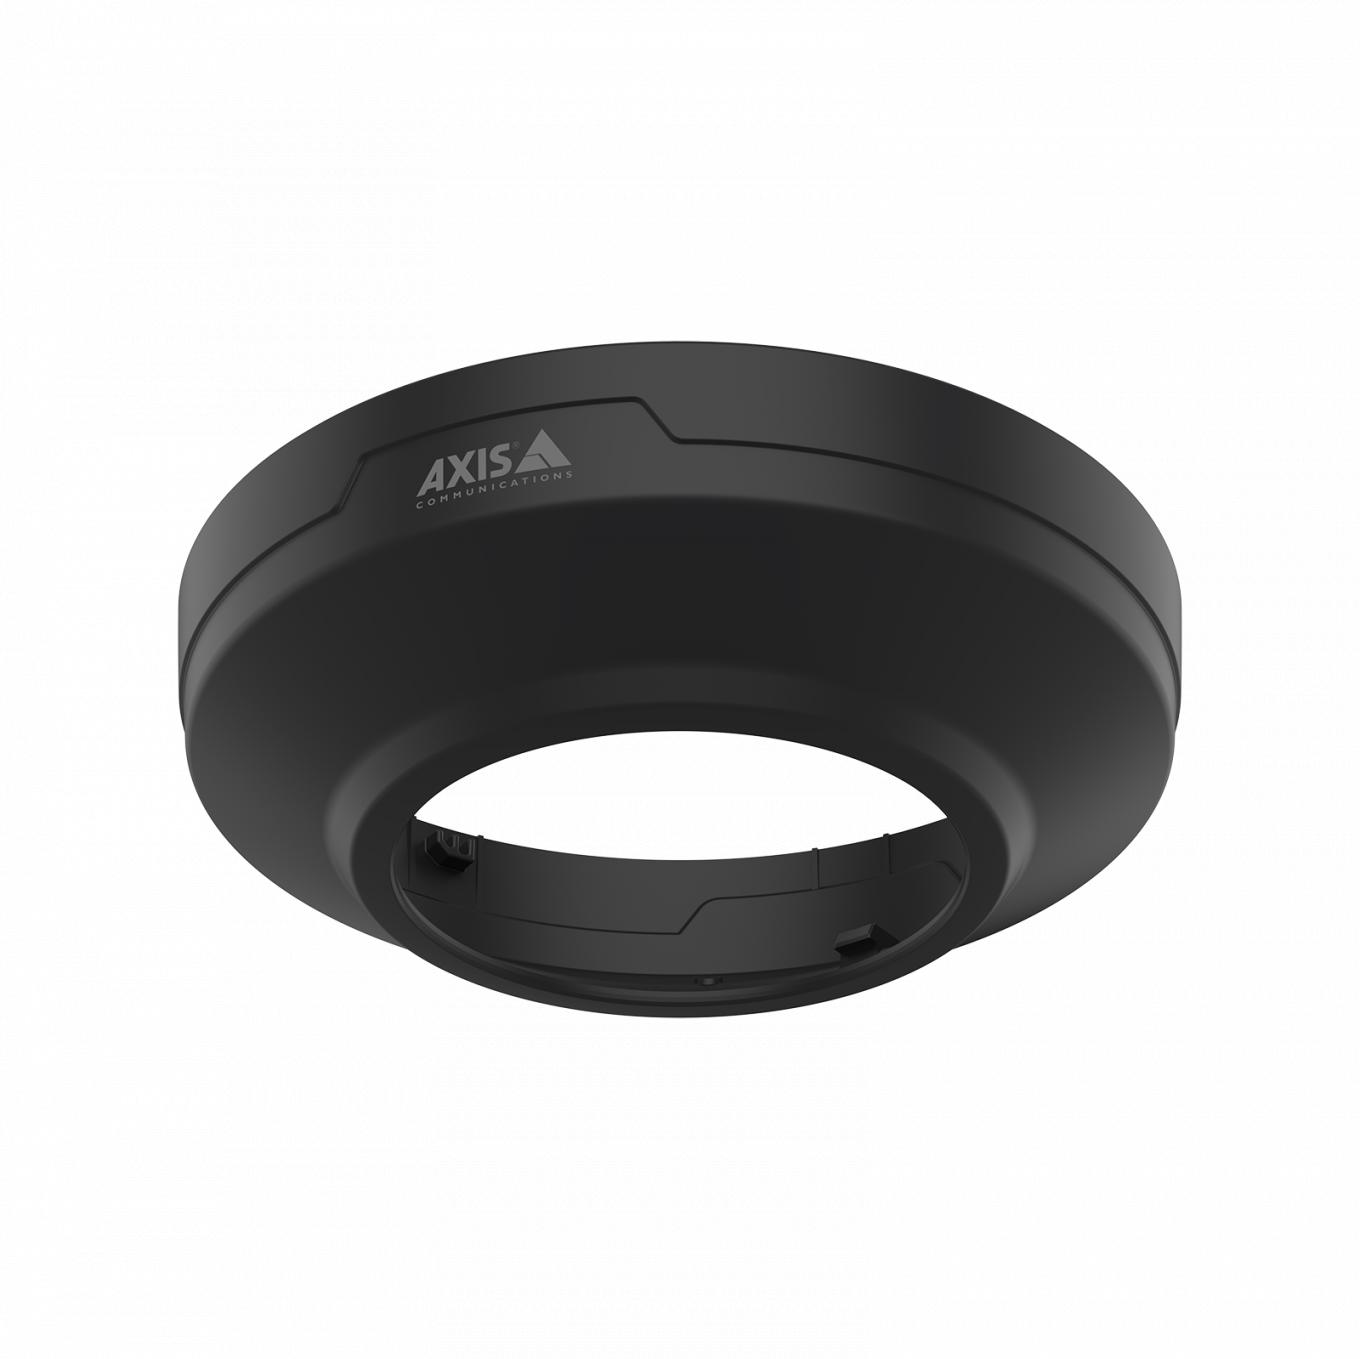 AXIS TM3818 Casing Black/White | Axis Communications